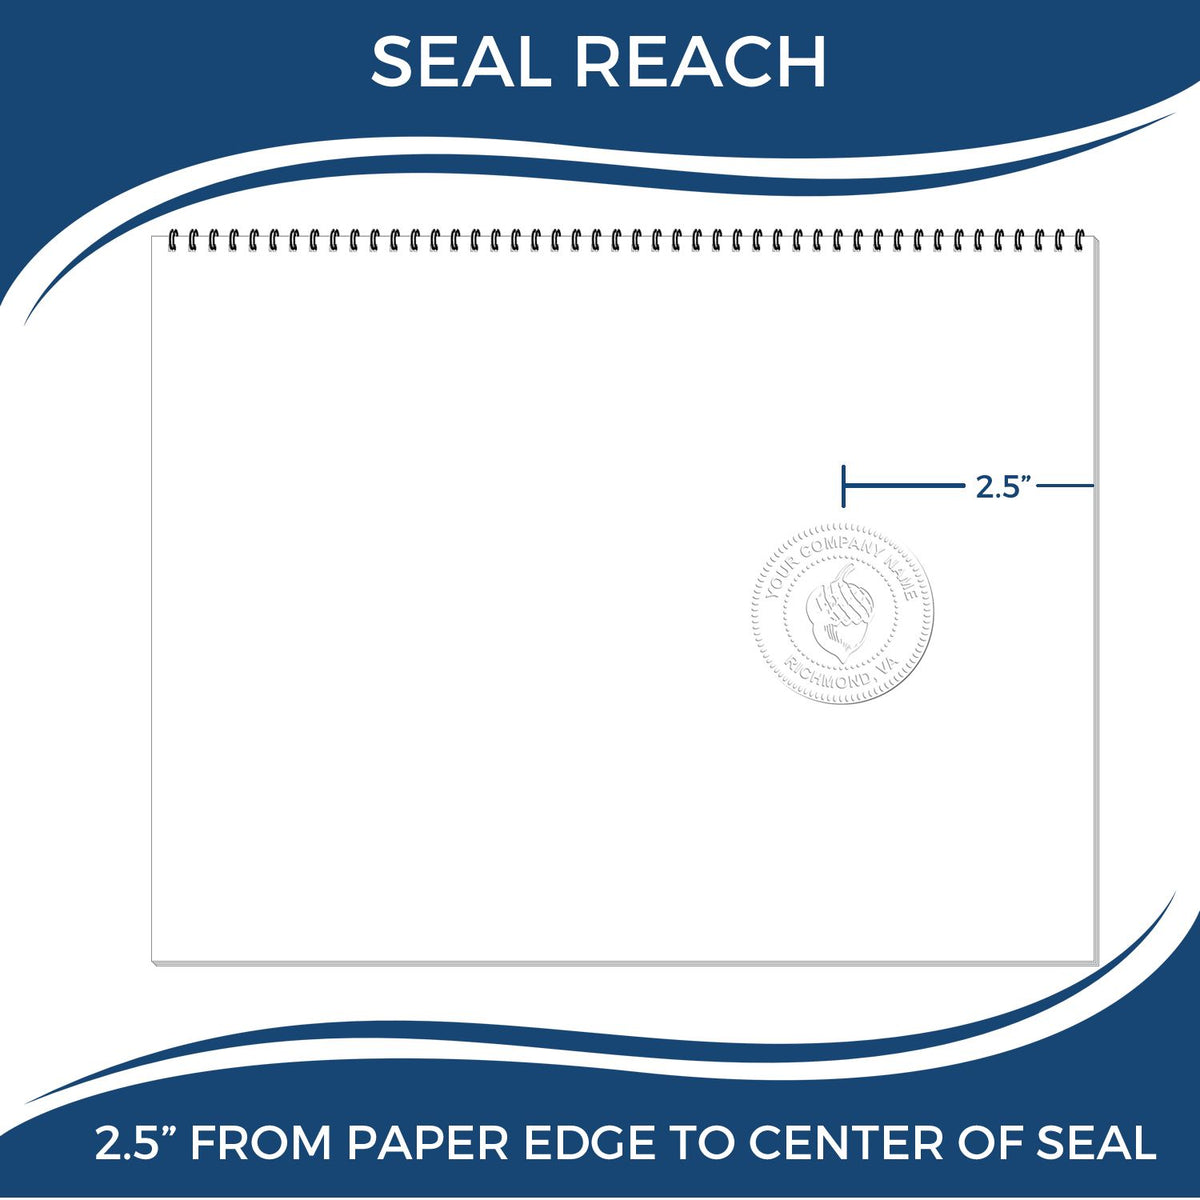 An infographic showing the seal reach which is represented by a ruler and a miniature seal image of the State of Vermont Long Reach Architectural Embossing Seal